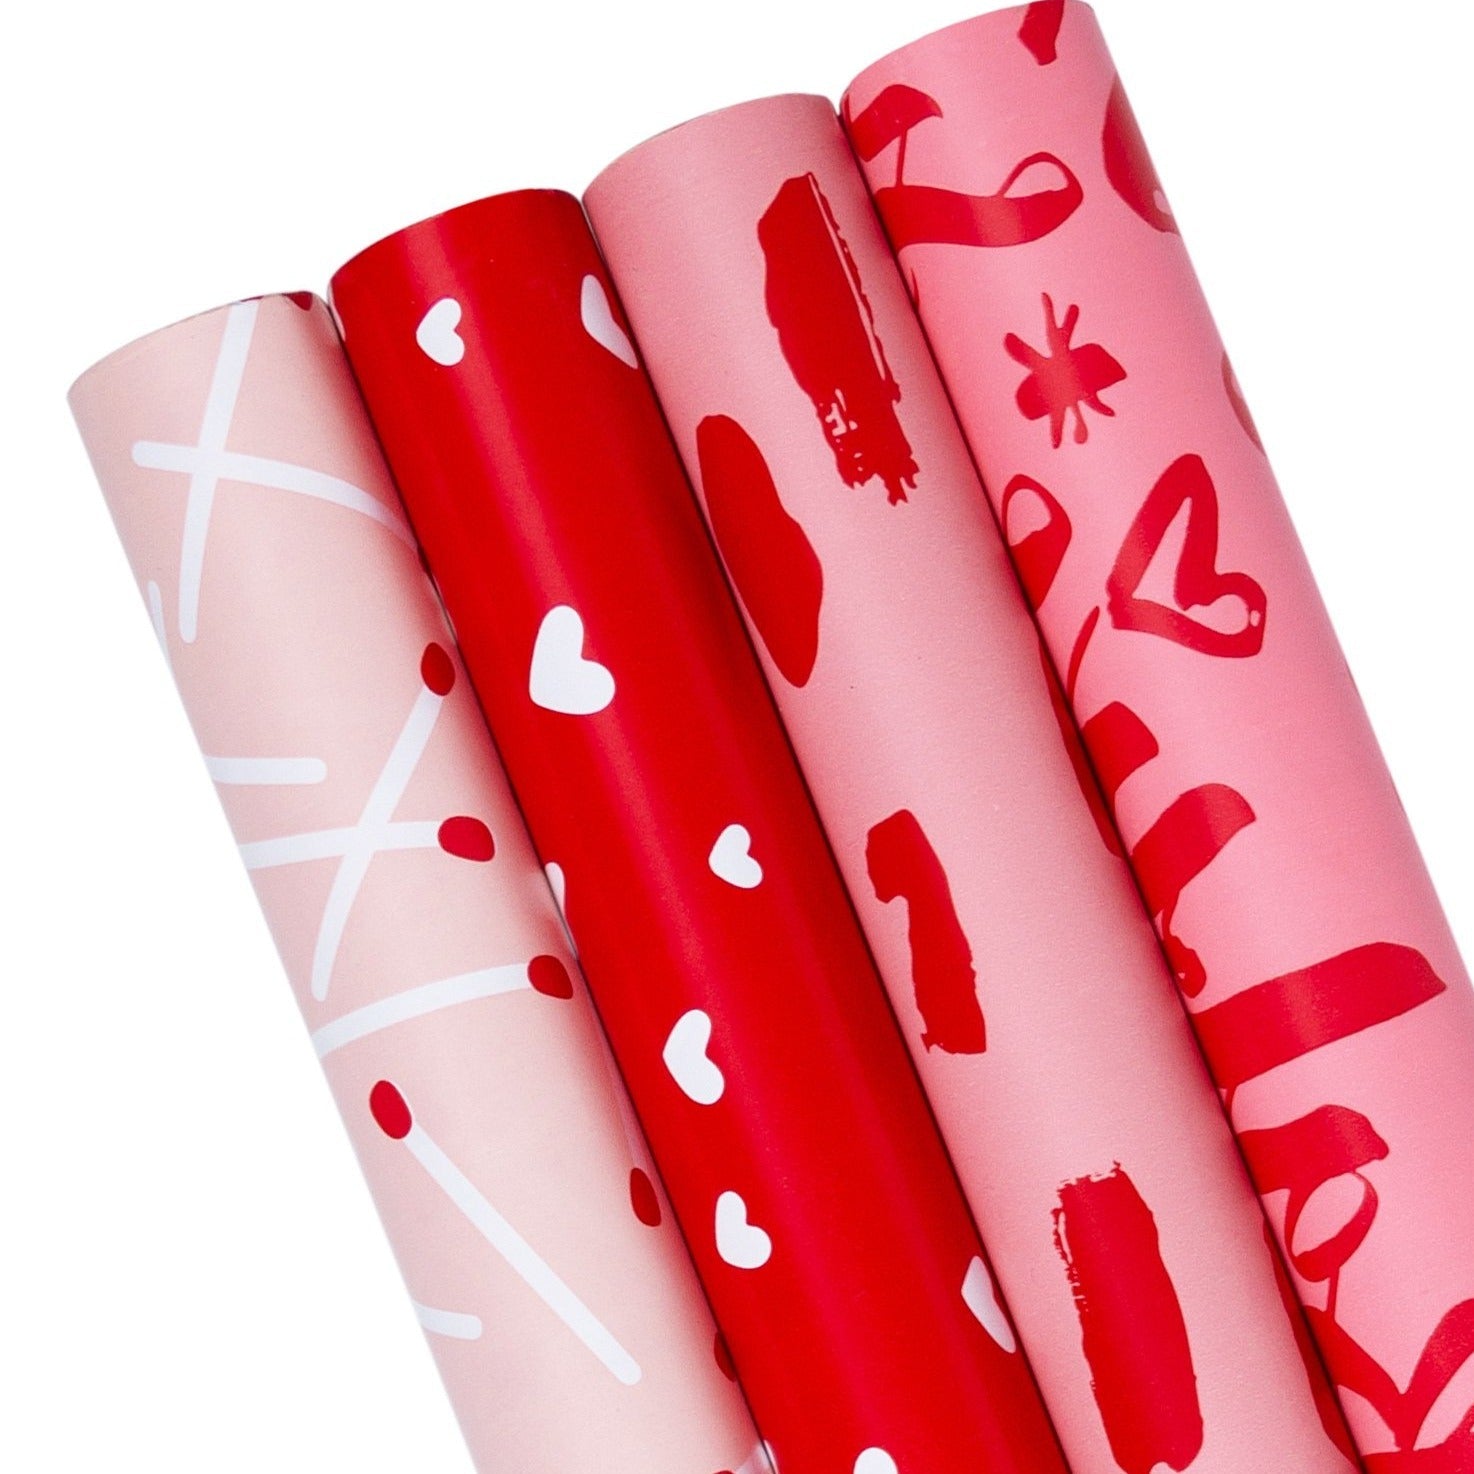 WRAPAHOLIC Christmas Wrapping Paper Roll 4 Rolls - 30 Inch X 120 Inch Per  Roll